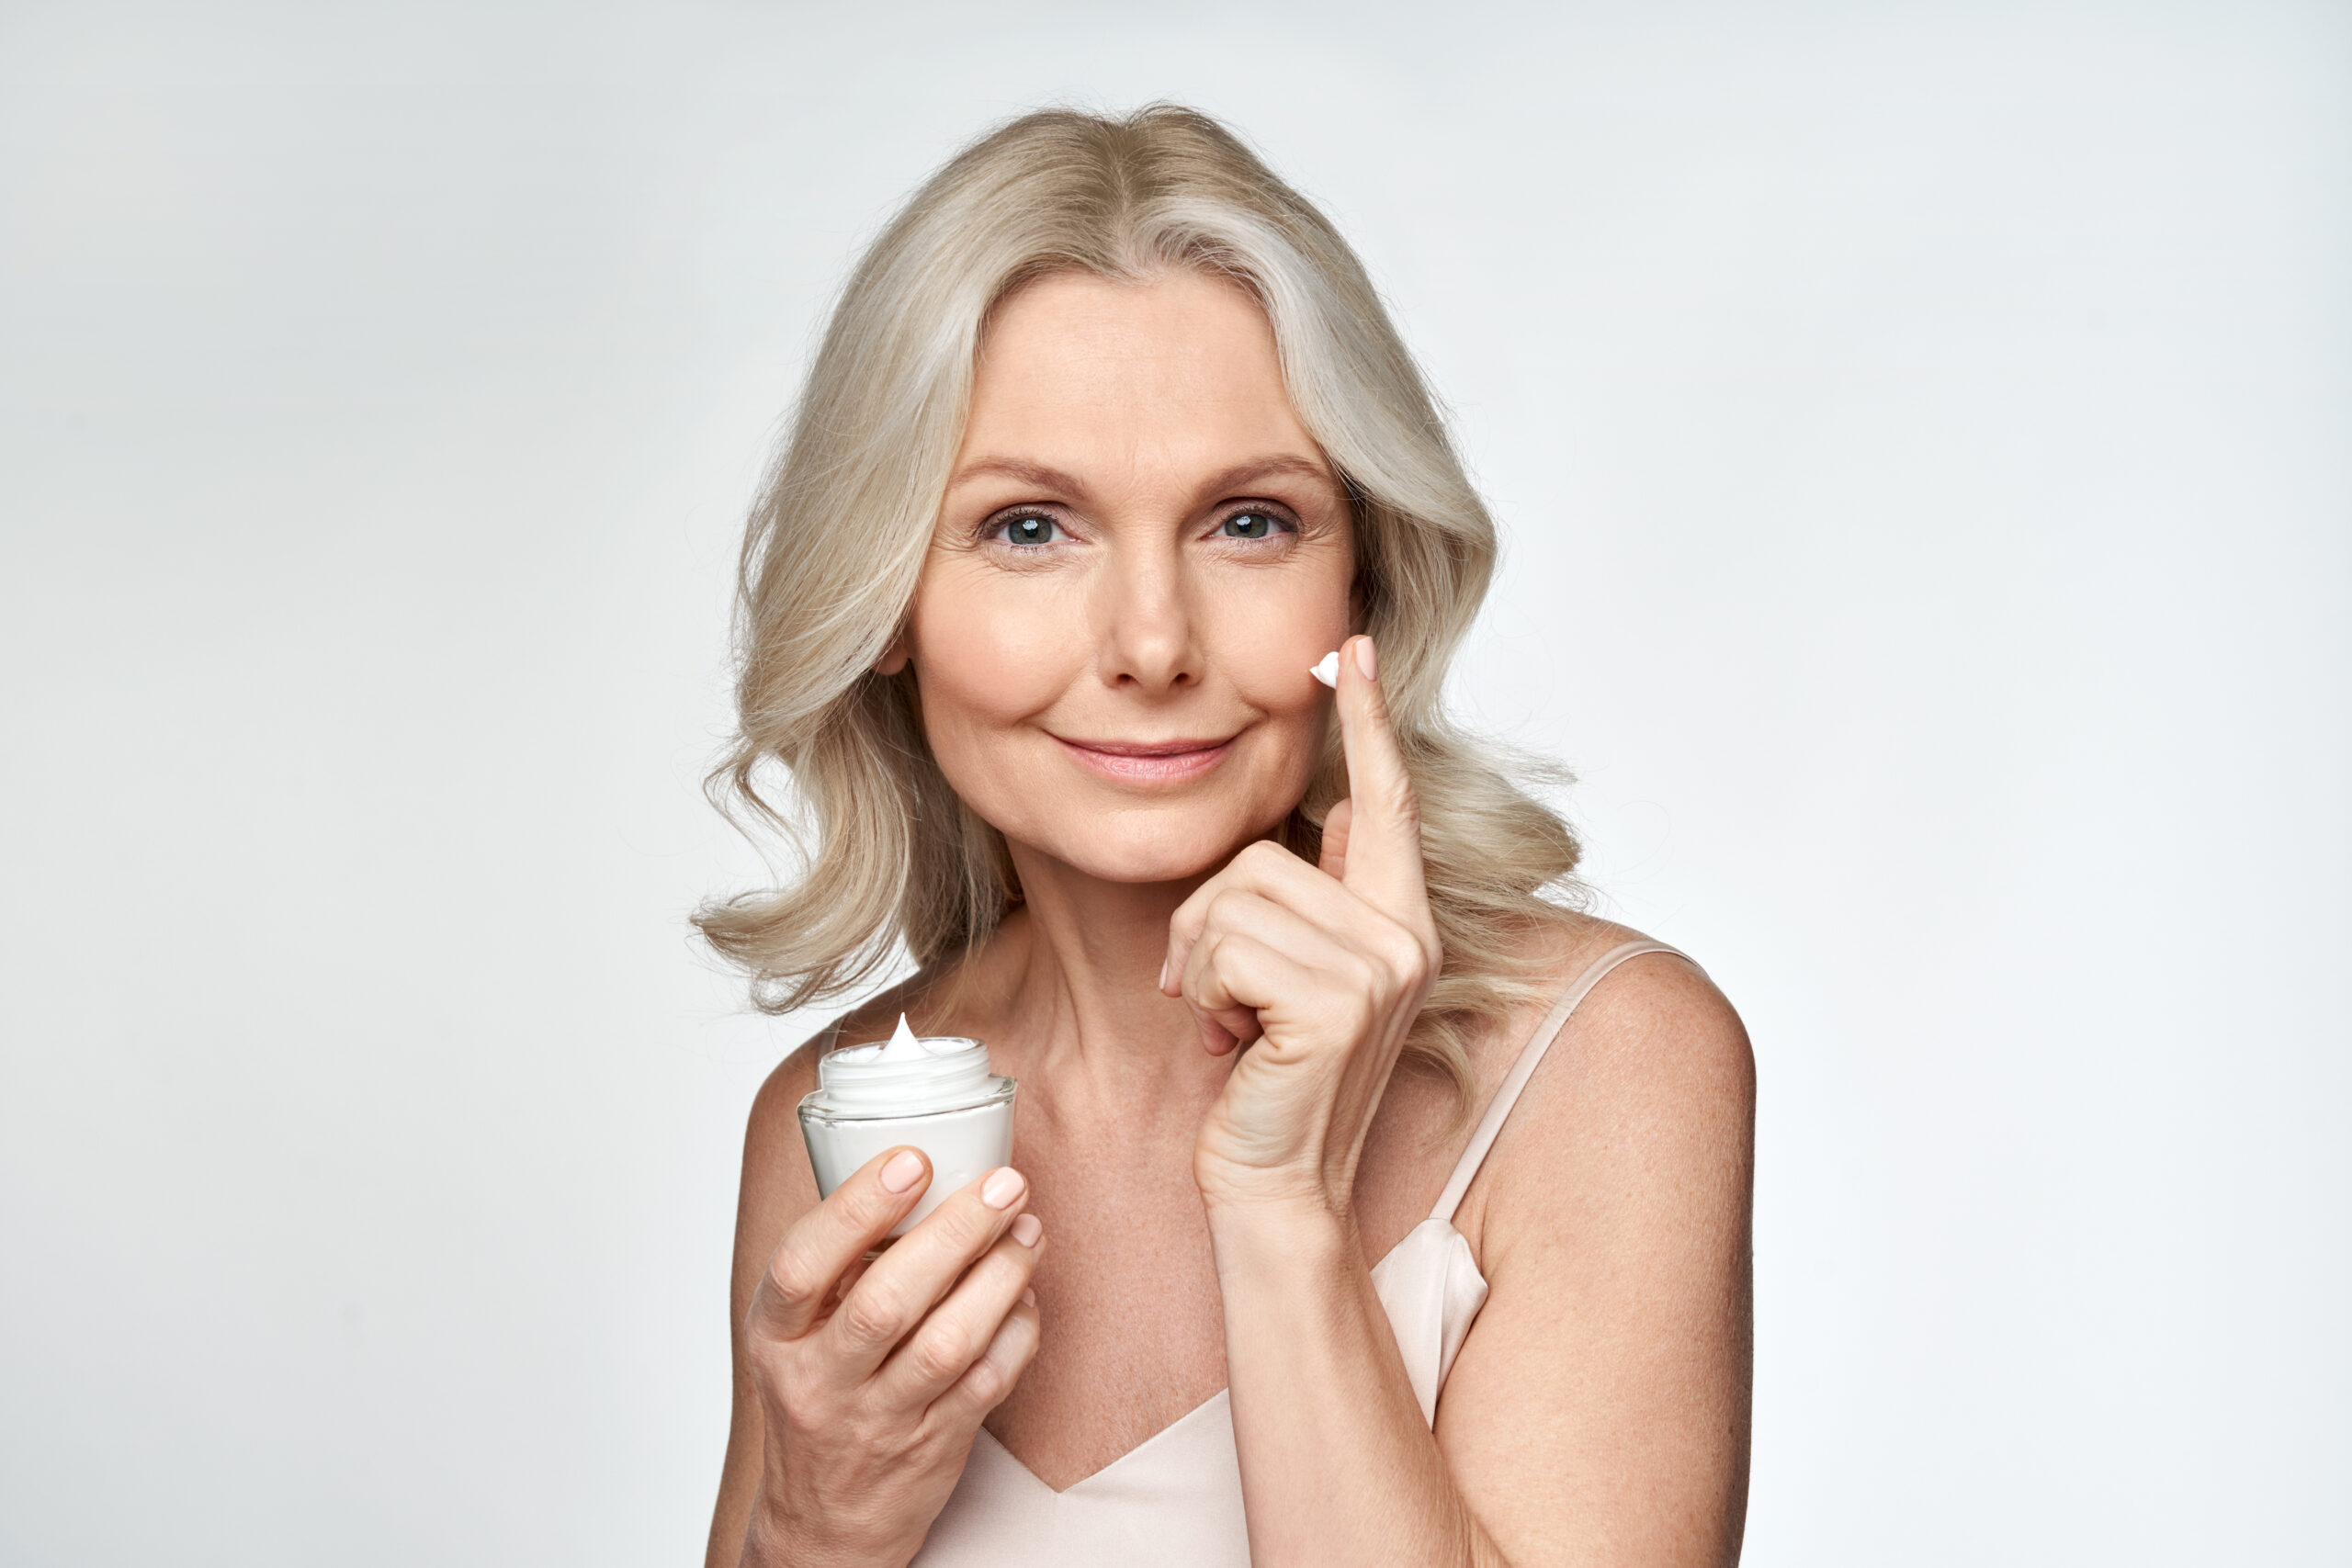 Smiling 50s middle aged mature woman putting tightening facial cream on face looking at camera. Anti age healthy dry skin care beauty therapy concept, skincare rejuvenation treatment against wrinkles.